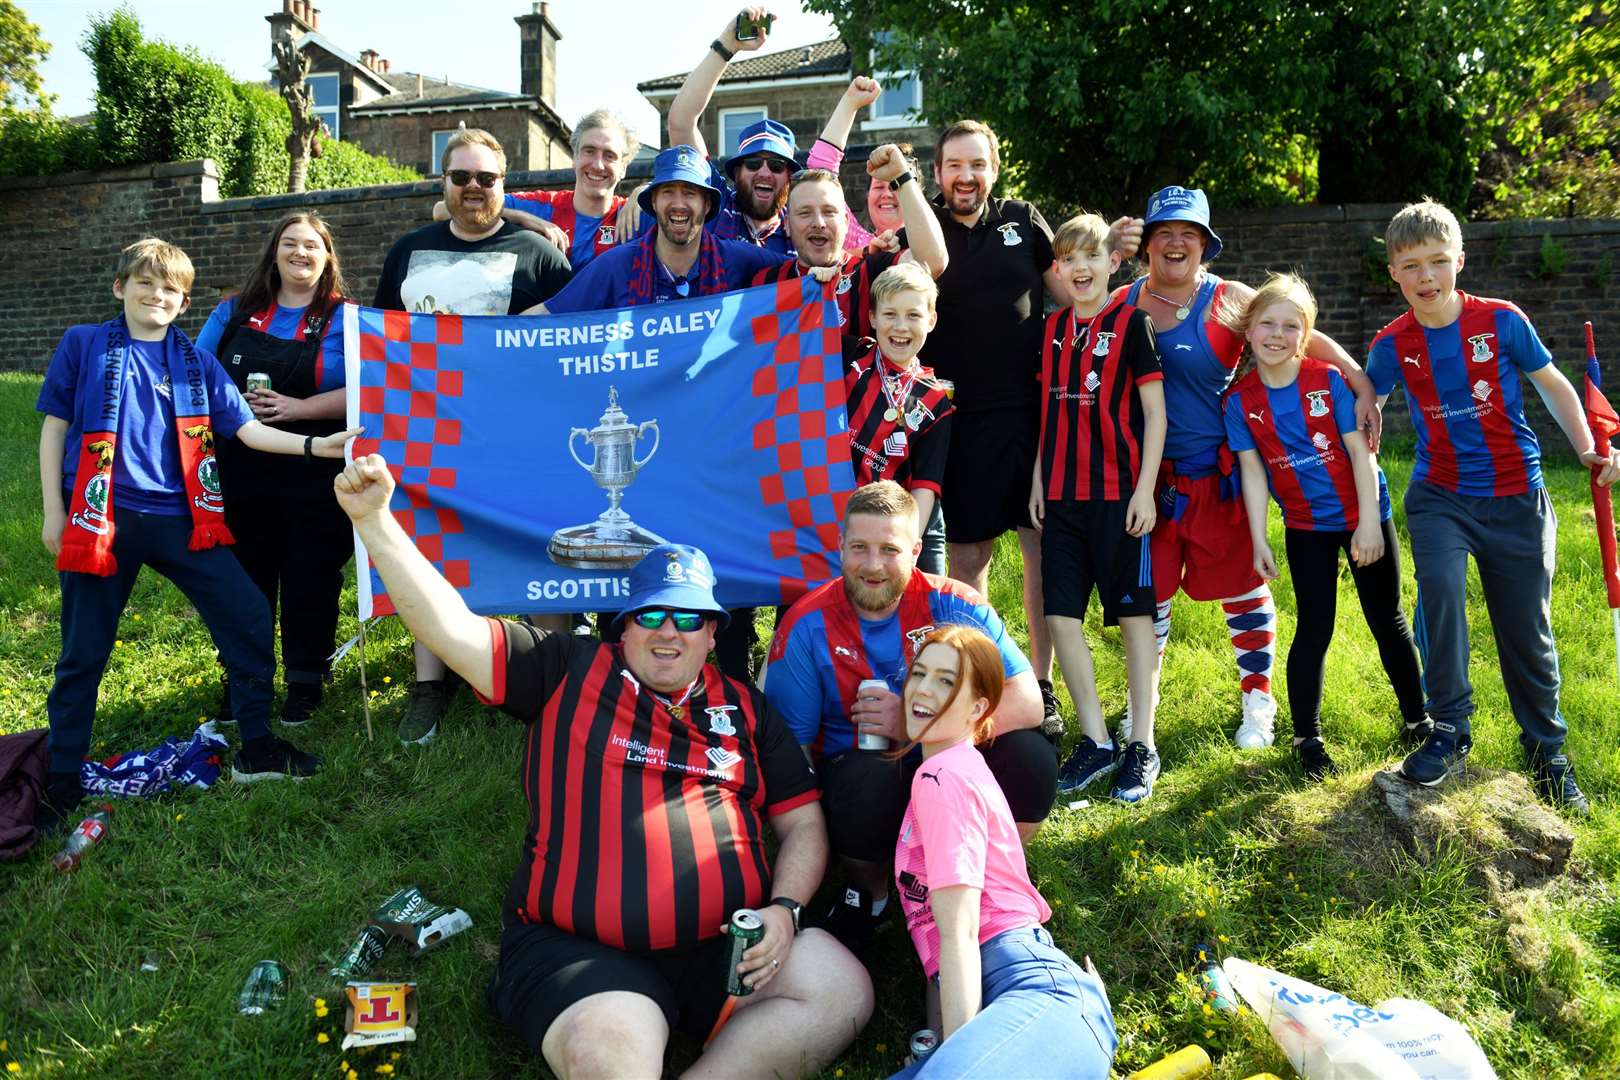 Inverness Caley Thistle supporters were in high spirits ahead of the match – and remained buoyant even after the result. Picture: James Mackenzie